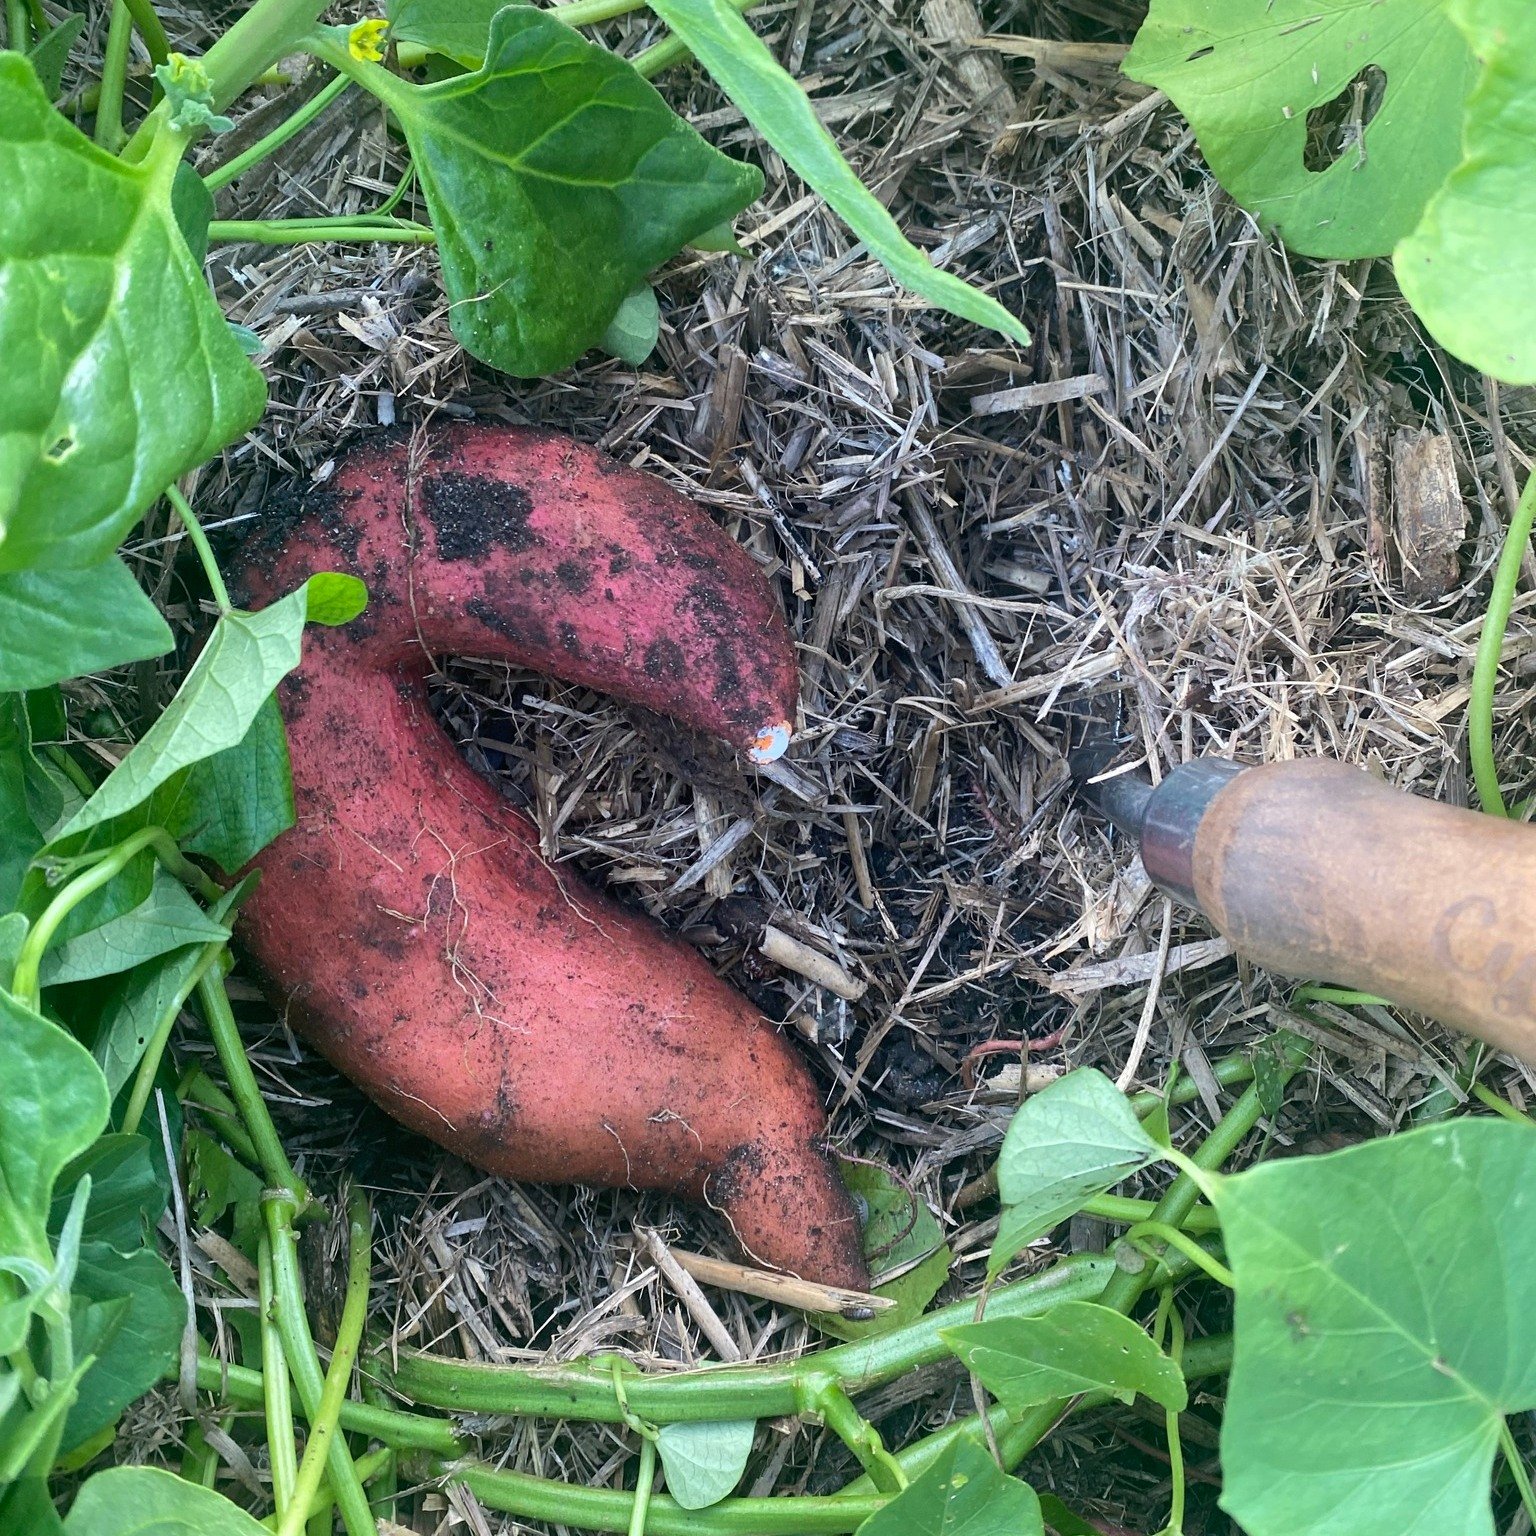 One of our new members just learnt how to &quot;bandicoot&quot; for sweet potatoes. (This is where you gently dig in &amp; under the vine until you feel a potato &amp; then pull it out.) She found a biggy!